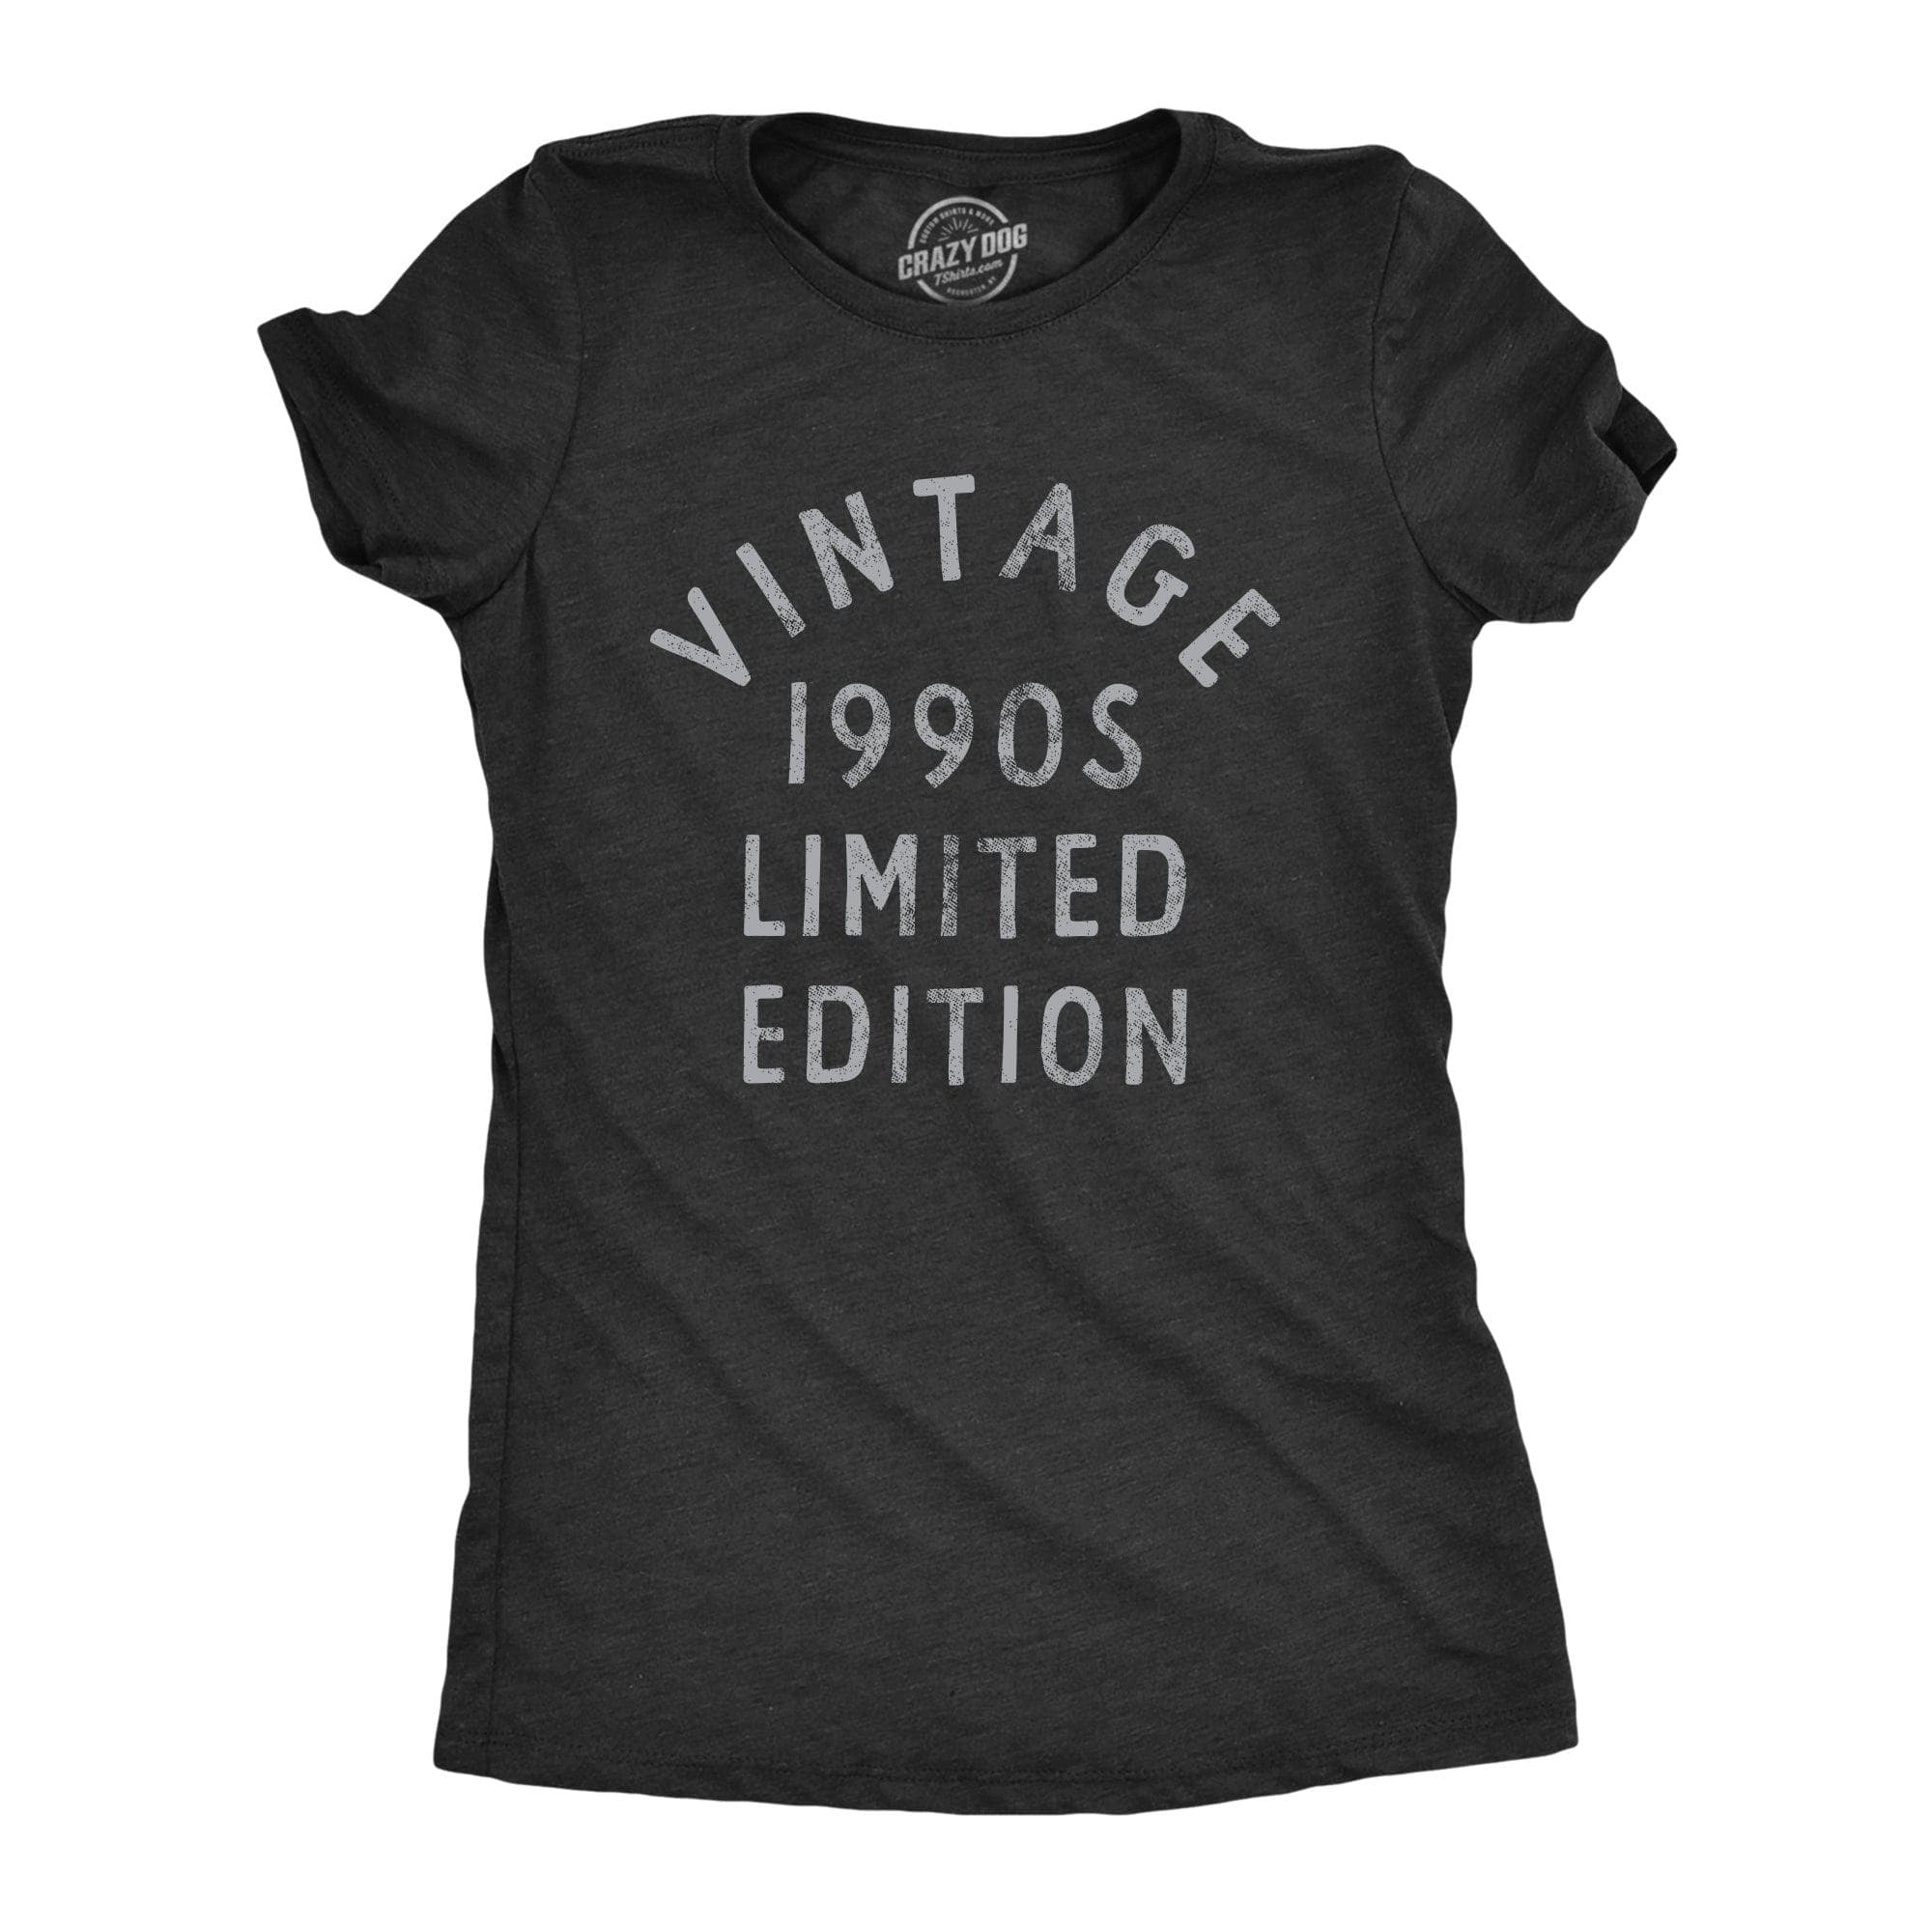 Vintage 1990s Limited Edition Women's Tshirt  -  Crazy Dog T-Shirts